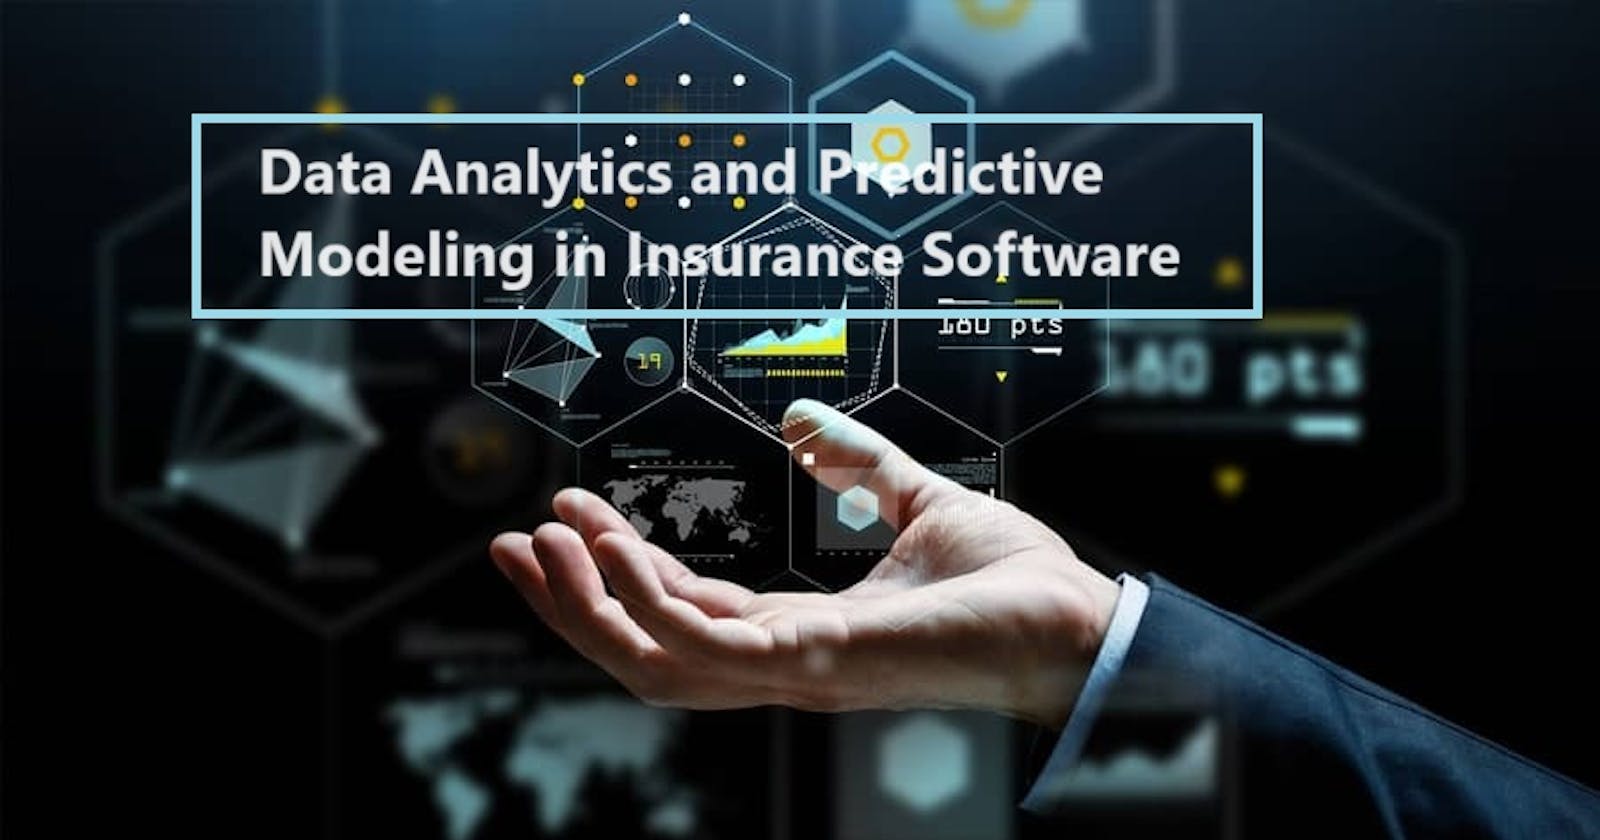 Data Analytics and Predictive Modeling in Insurance Software